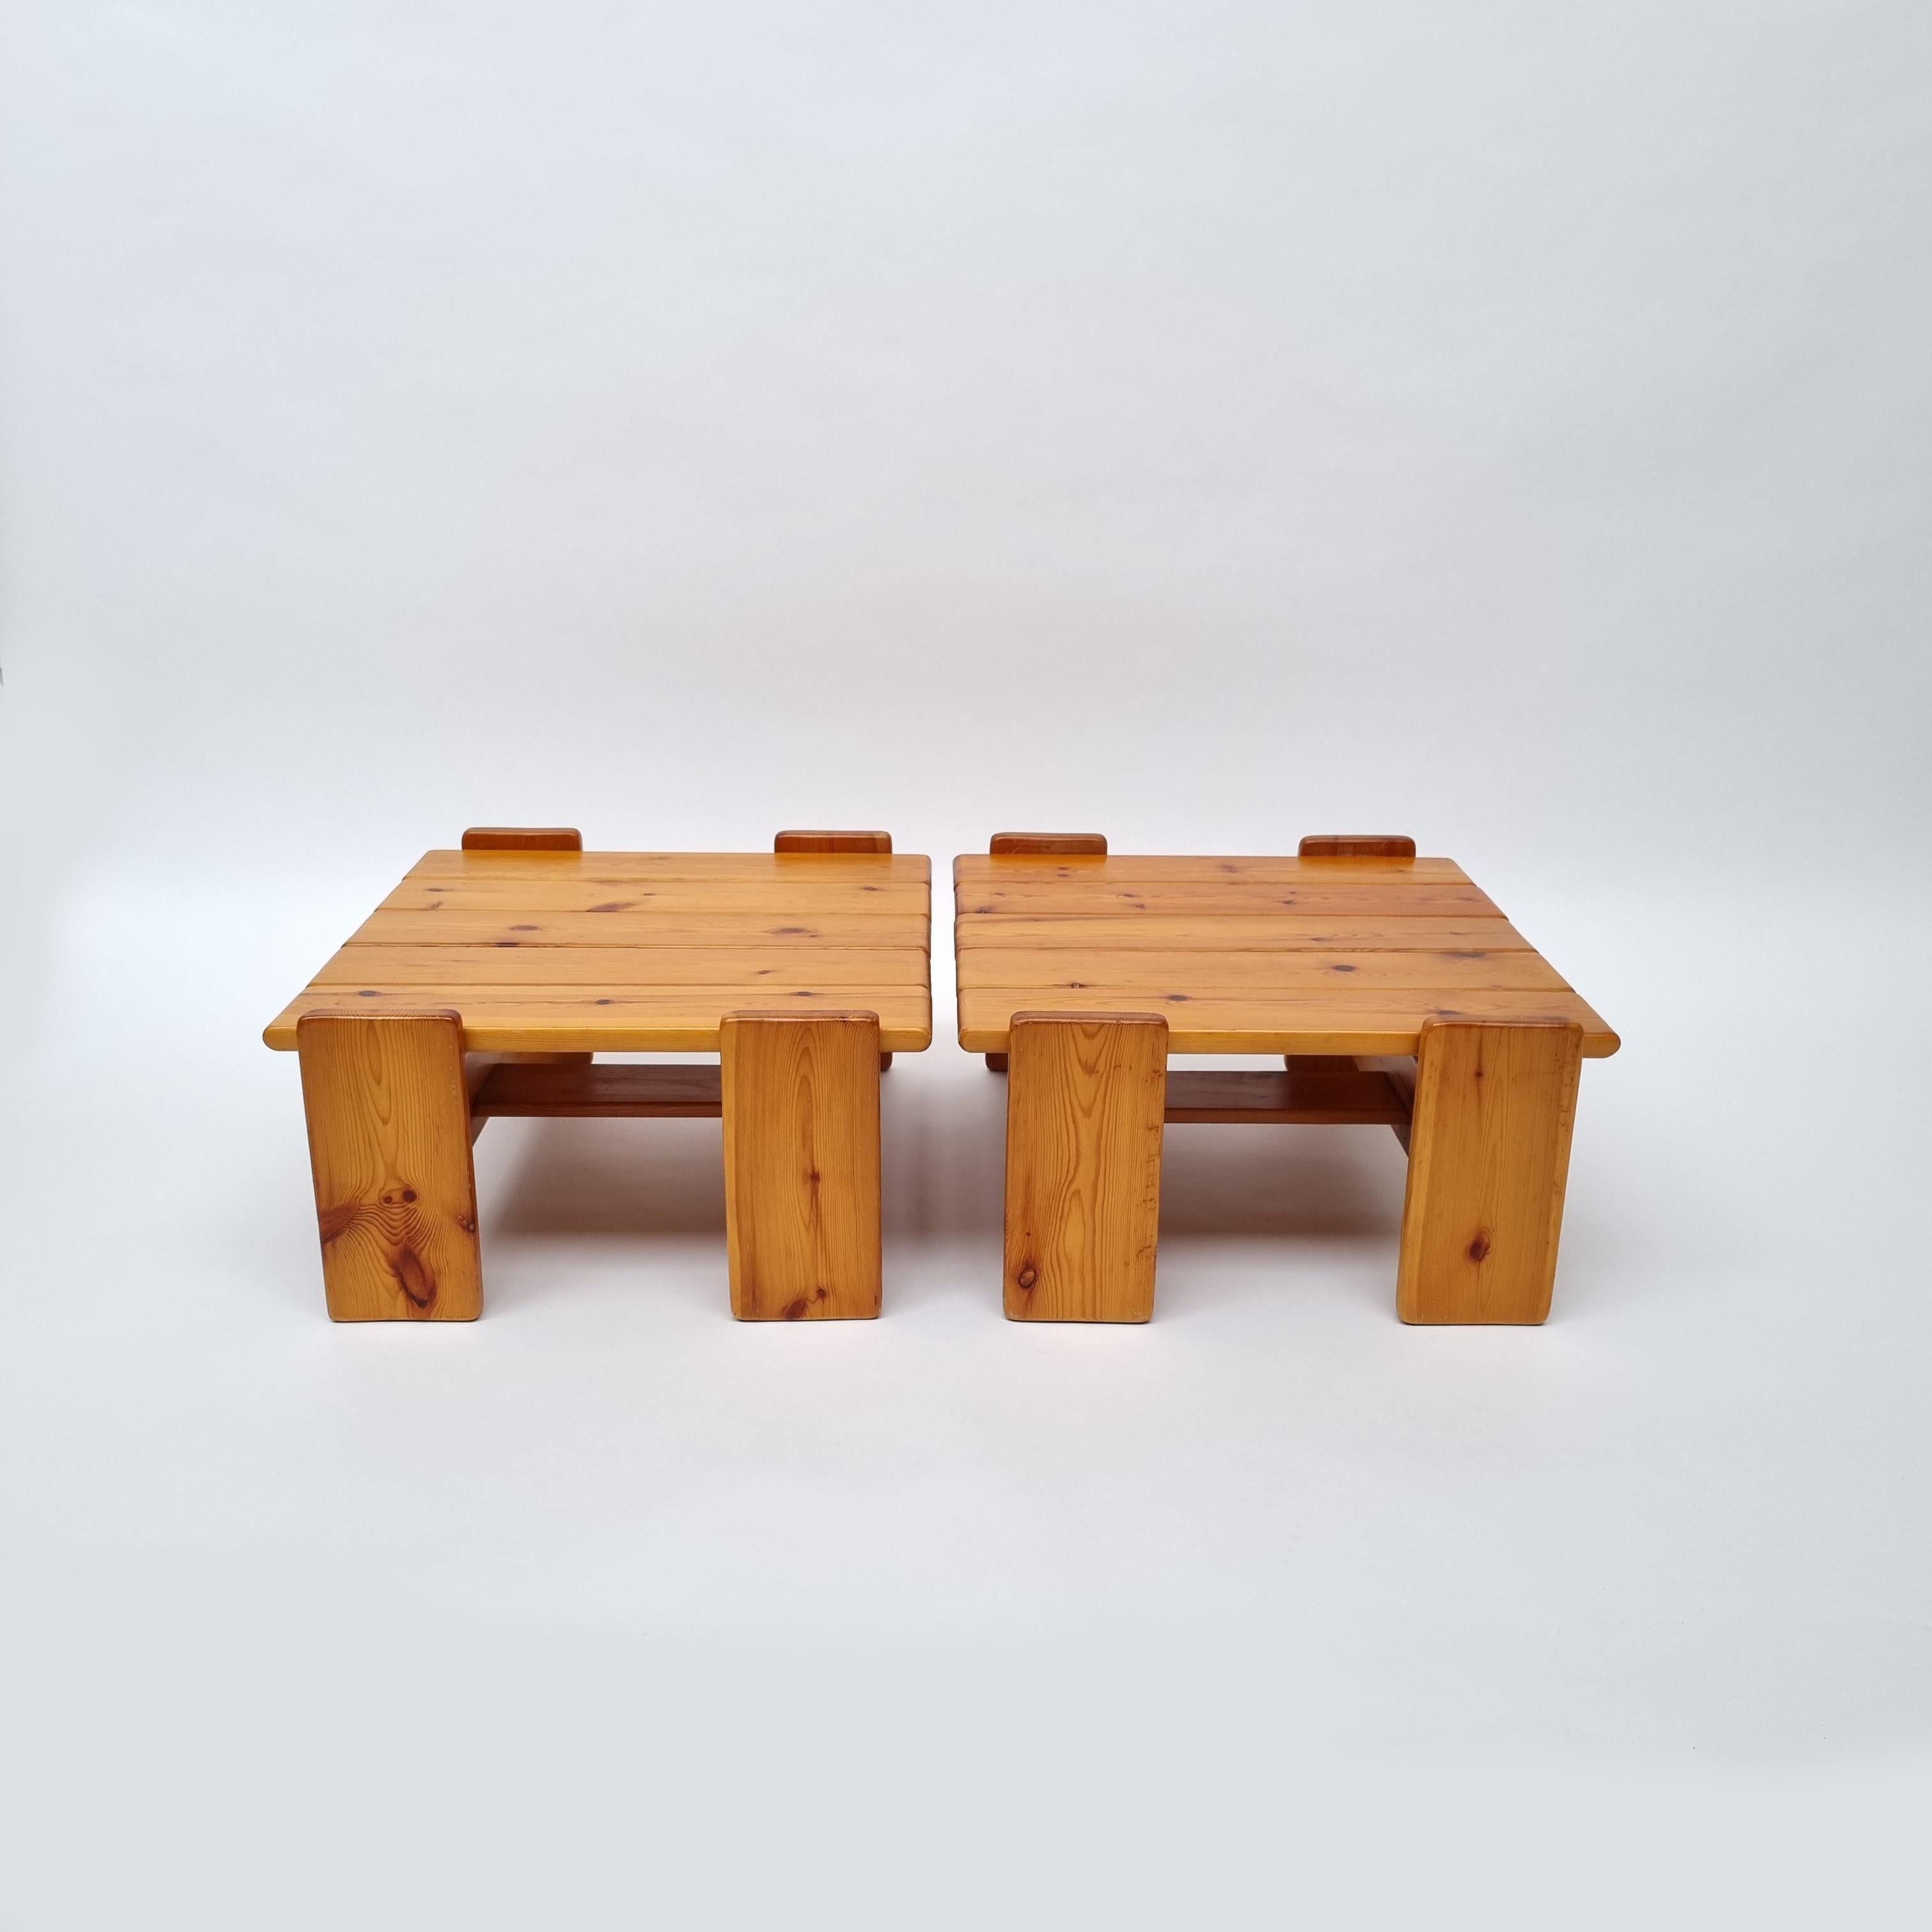 A Swedish pinewood coffee table or side table, 1970s. Purity of form enhances the beauty of wood.